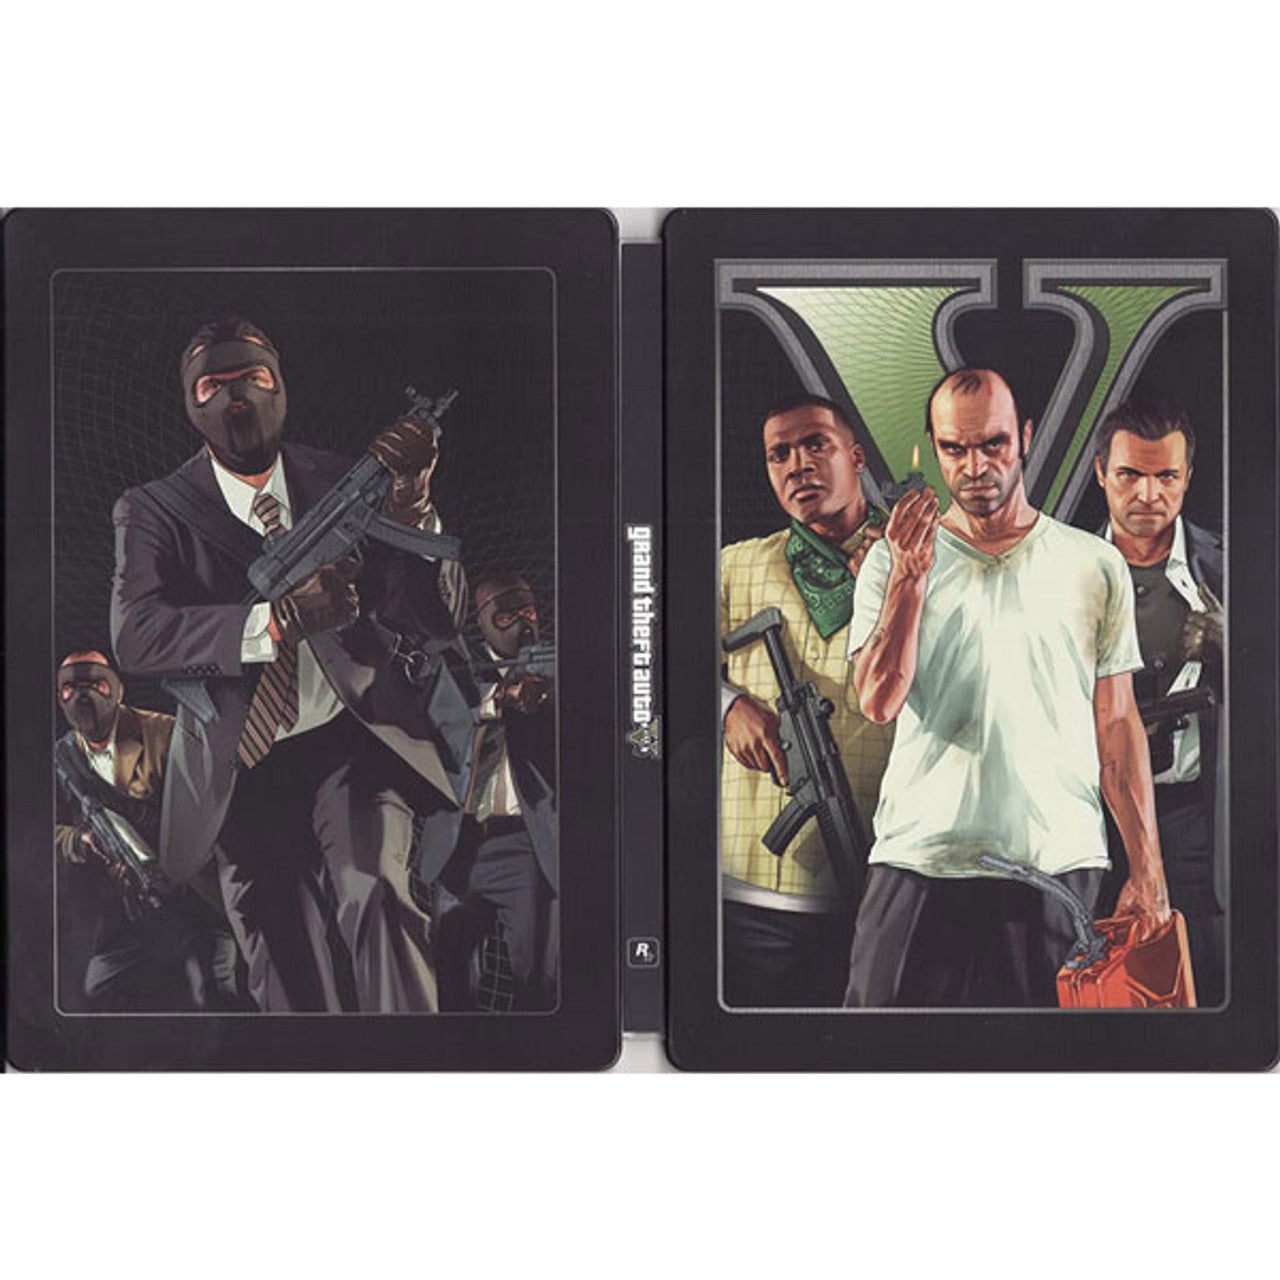 Grand Theft Auto V (Steelbook) - (PS3) PlayStation 3 [Pre-Owned] Video Games Rockstar Games   